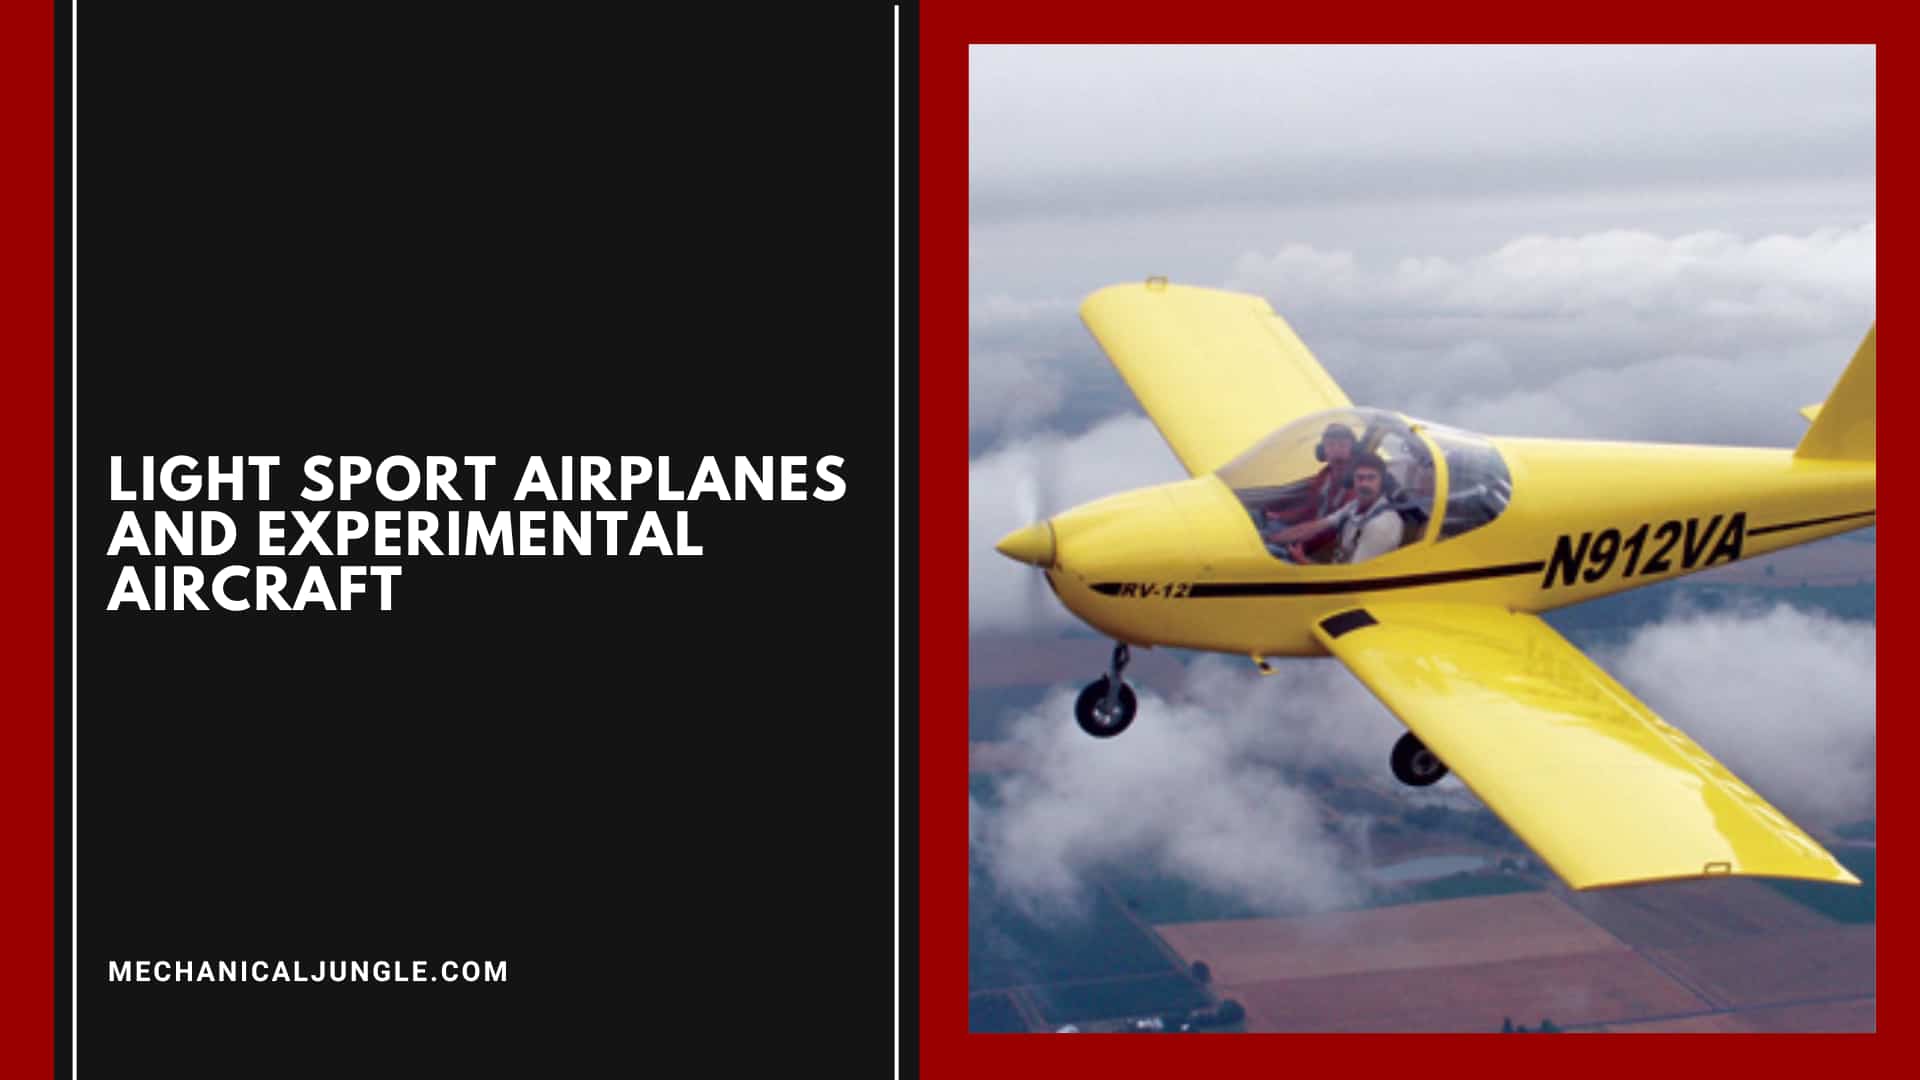 Light Sport Airplanes and Experimental Aircraft